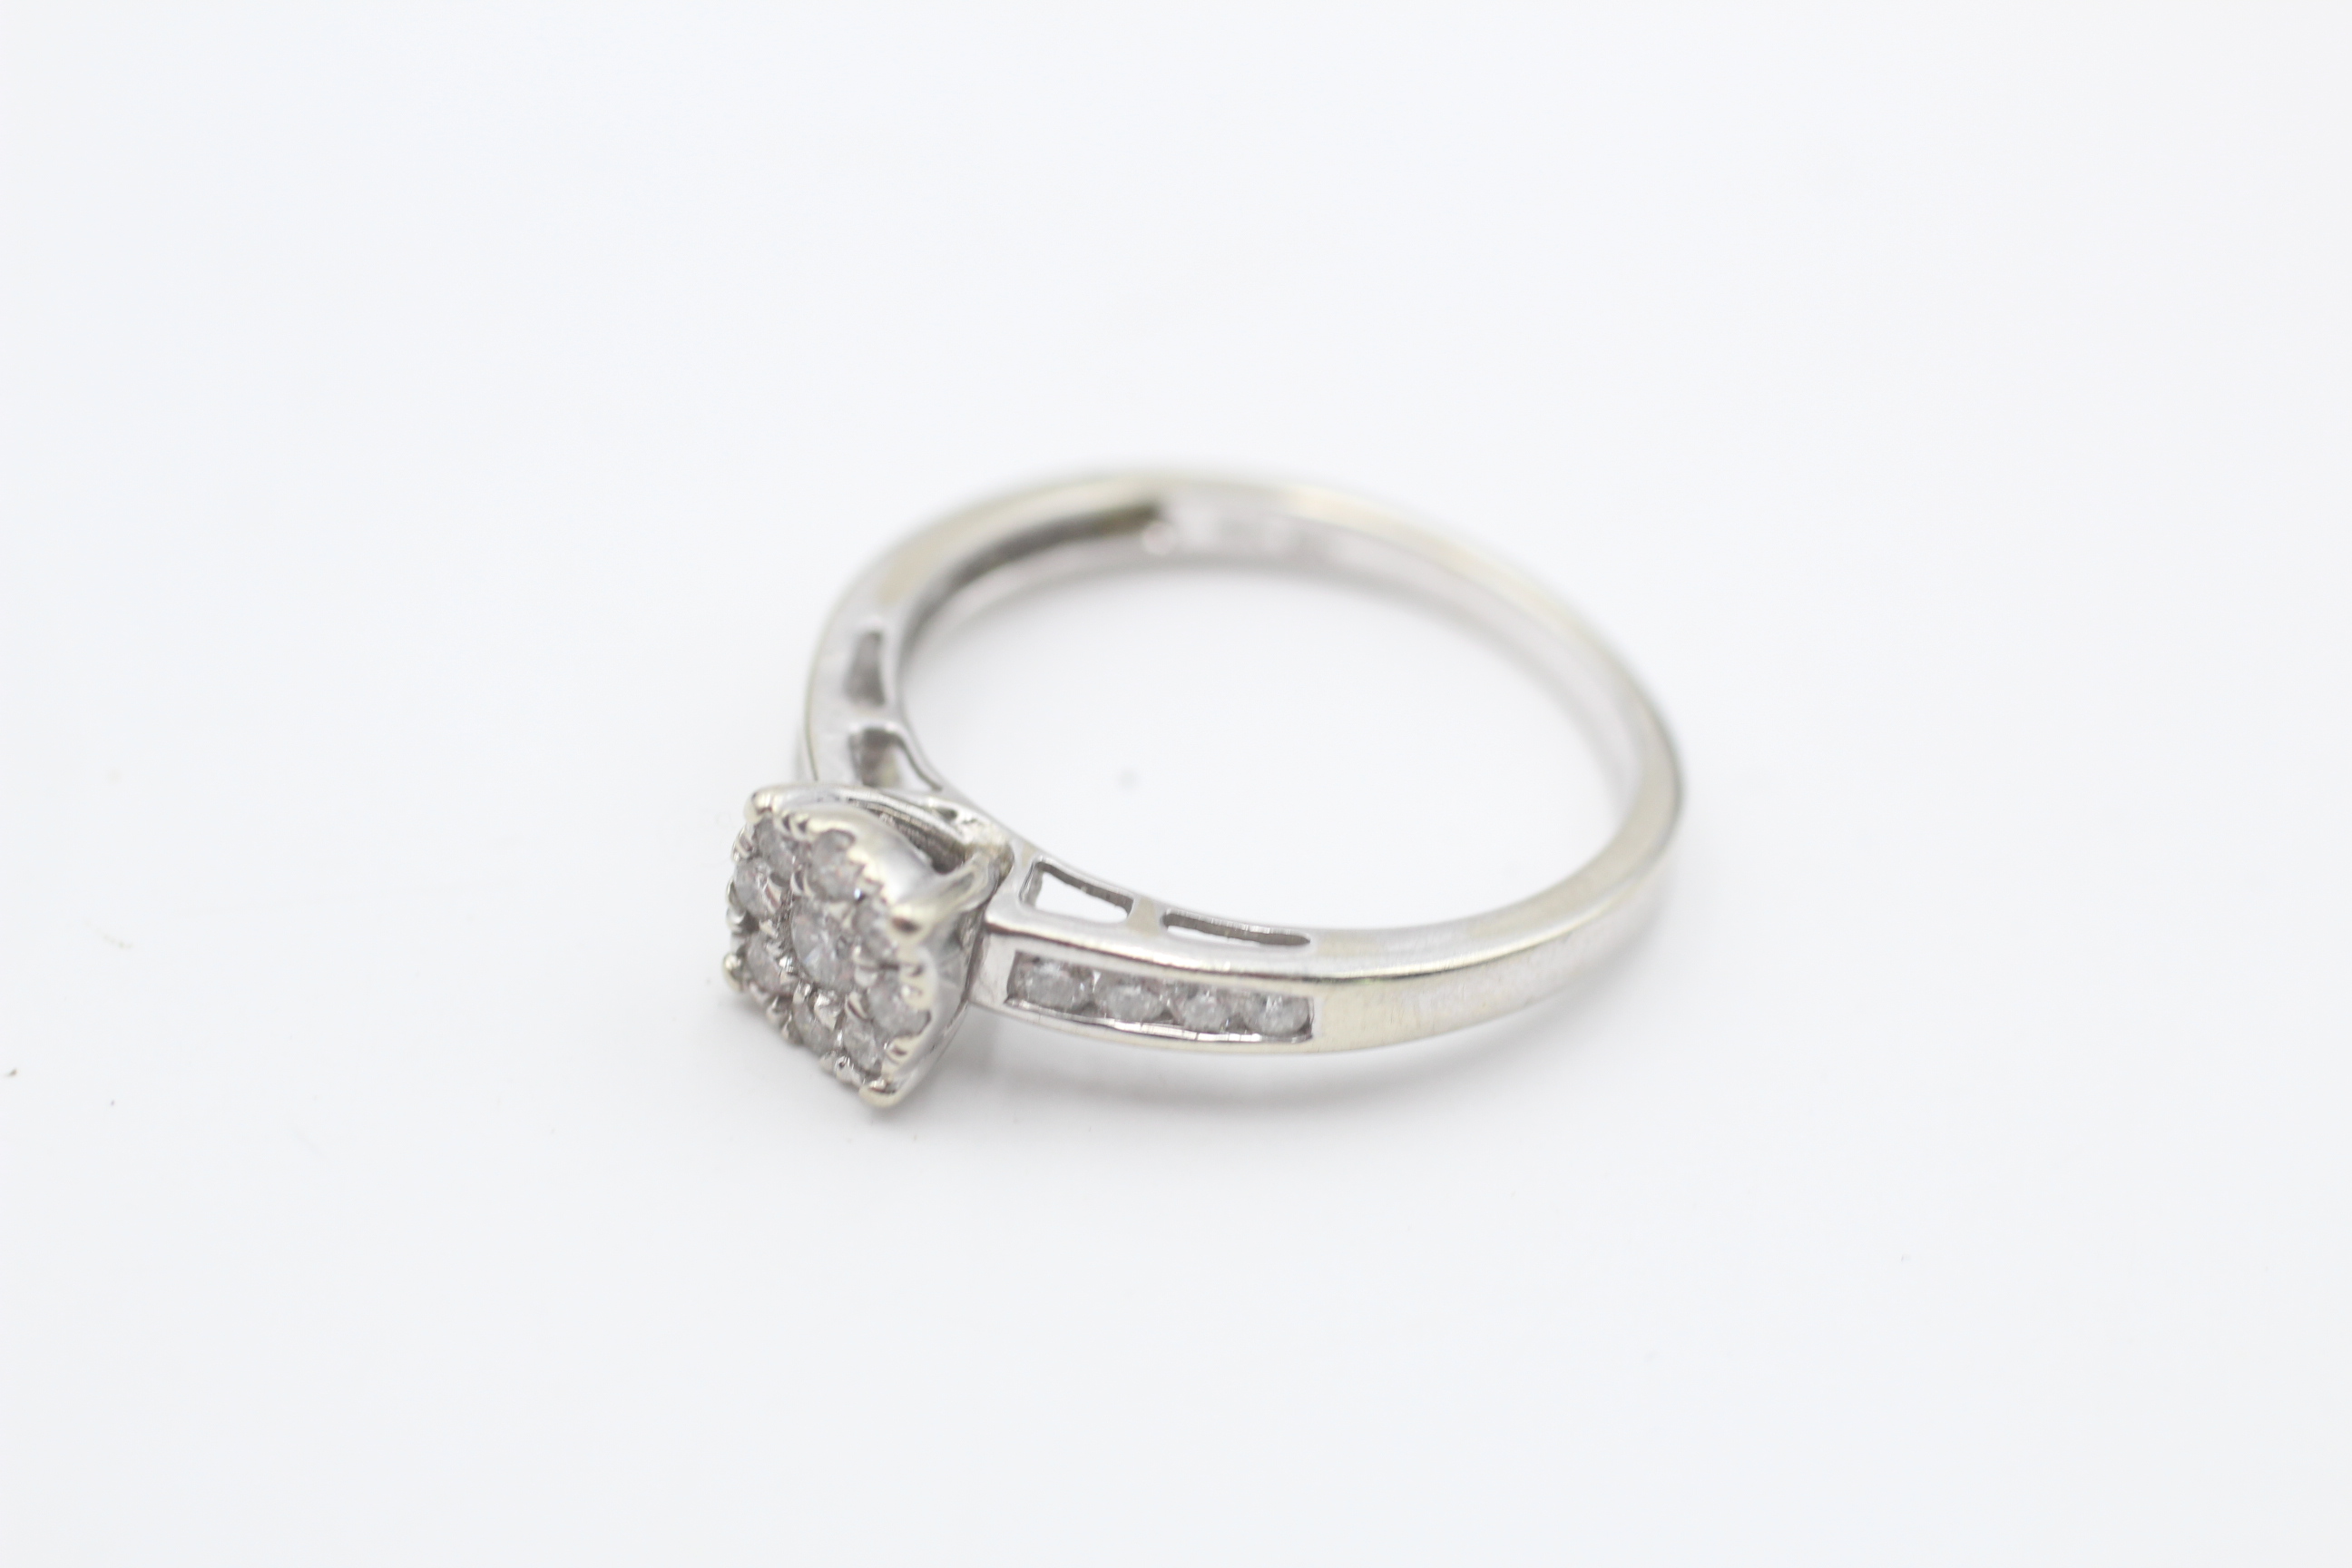 9ct white gold diamond halo & channel set shoulders ring (1.9g) - Image 2 of 4